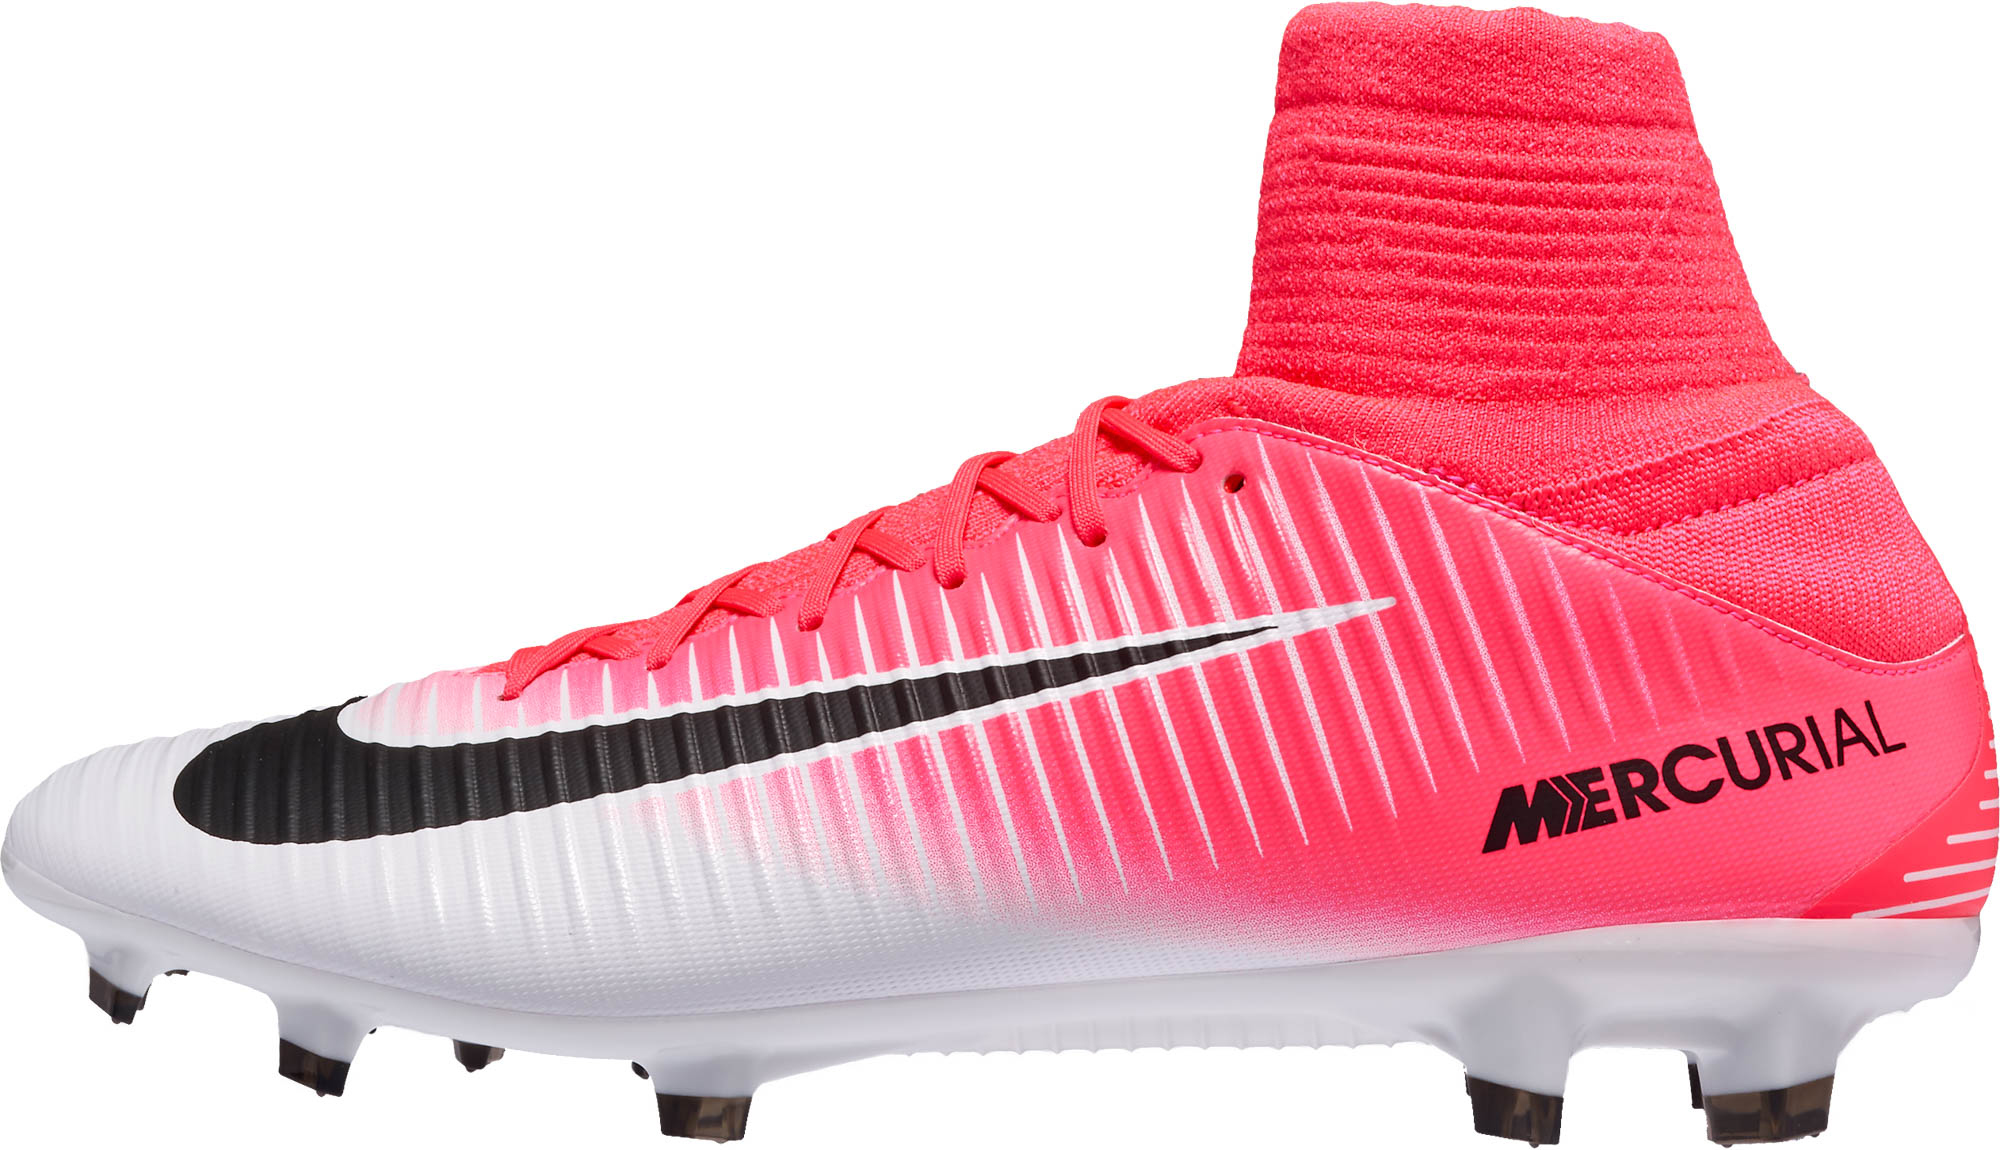 soccer cleats nike pink